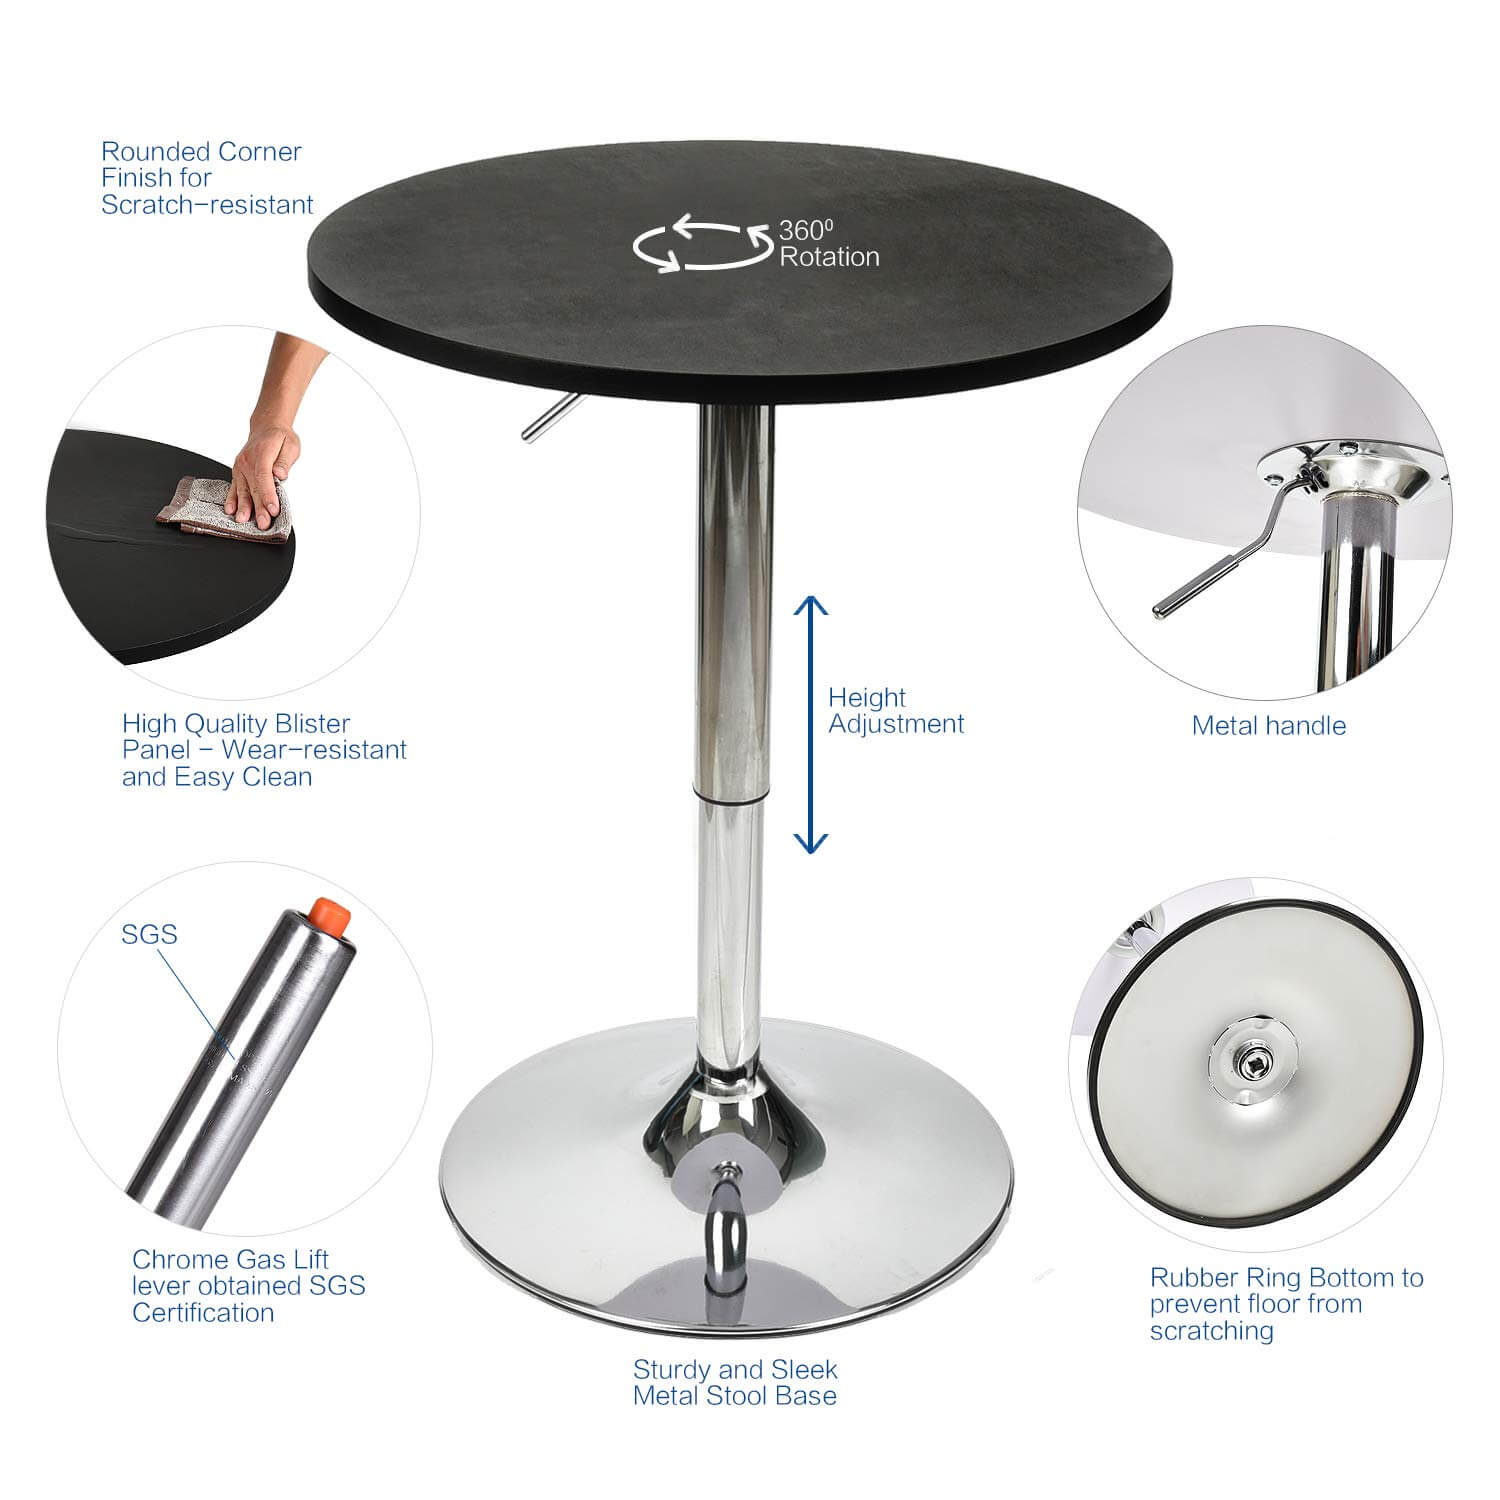 Elecwish black bar table features